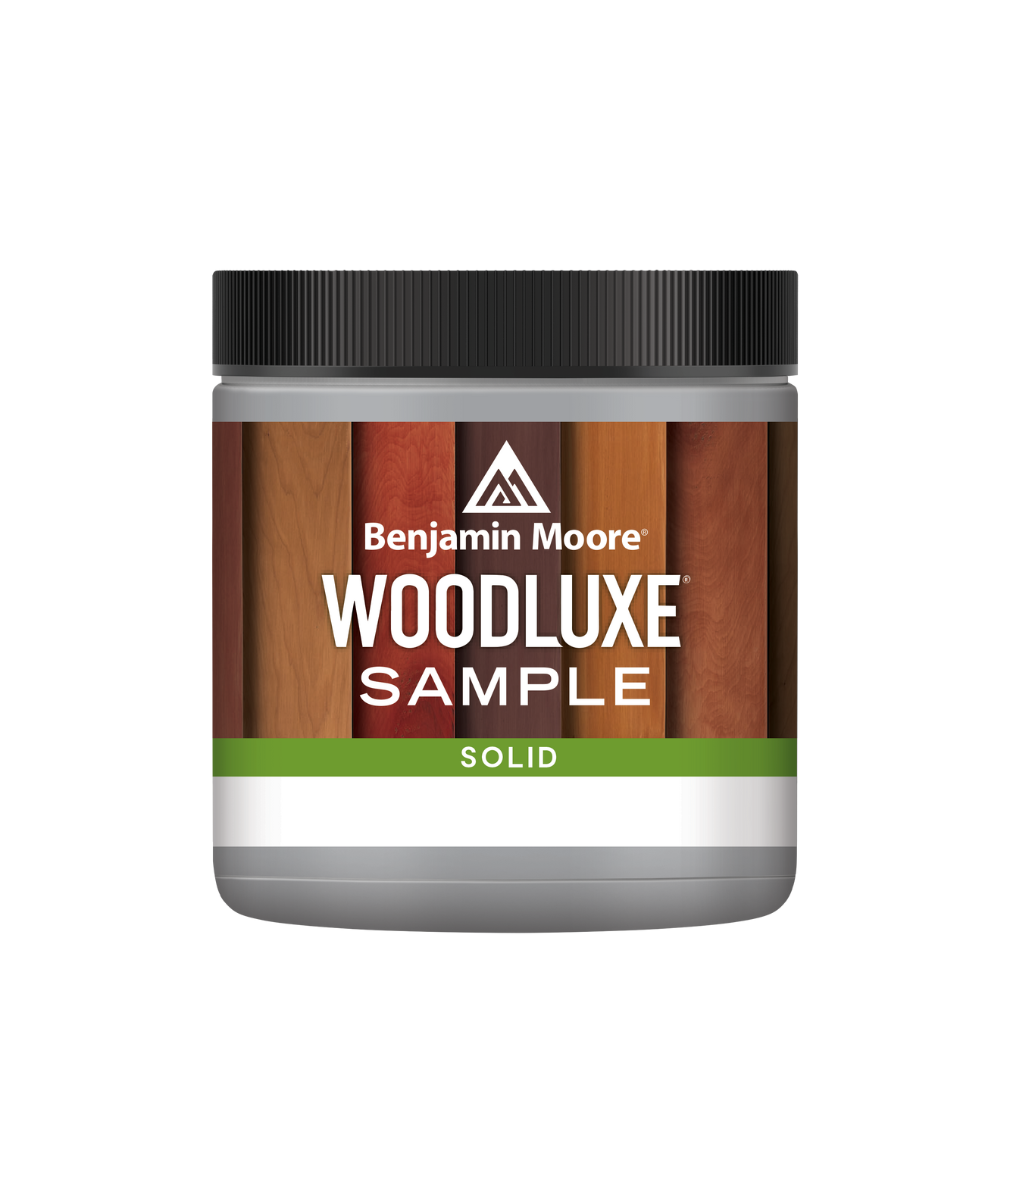 Benjamin Moore Woodluxe® Water-Based Solid Exterior Stain Half-Pint available to shop at Regal Paint Centers in Maryland, Virginia and DC.